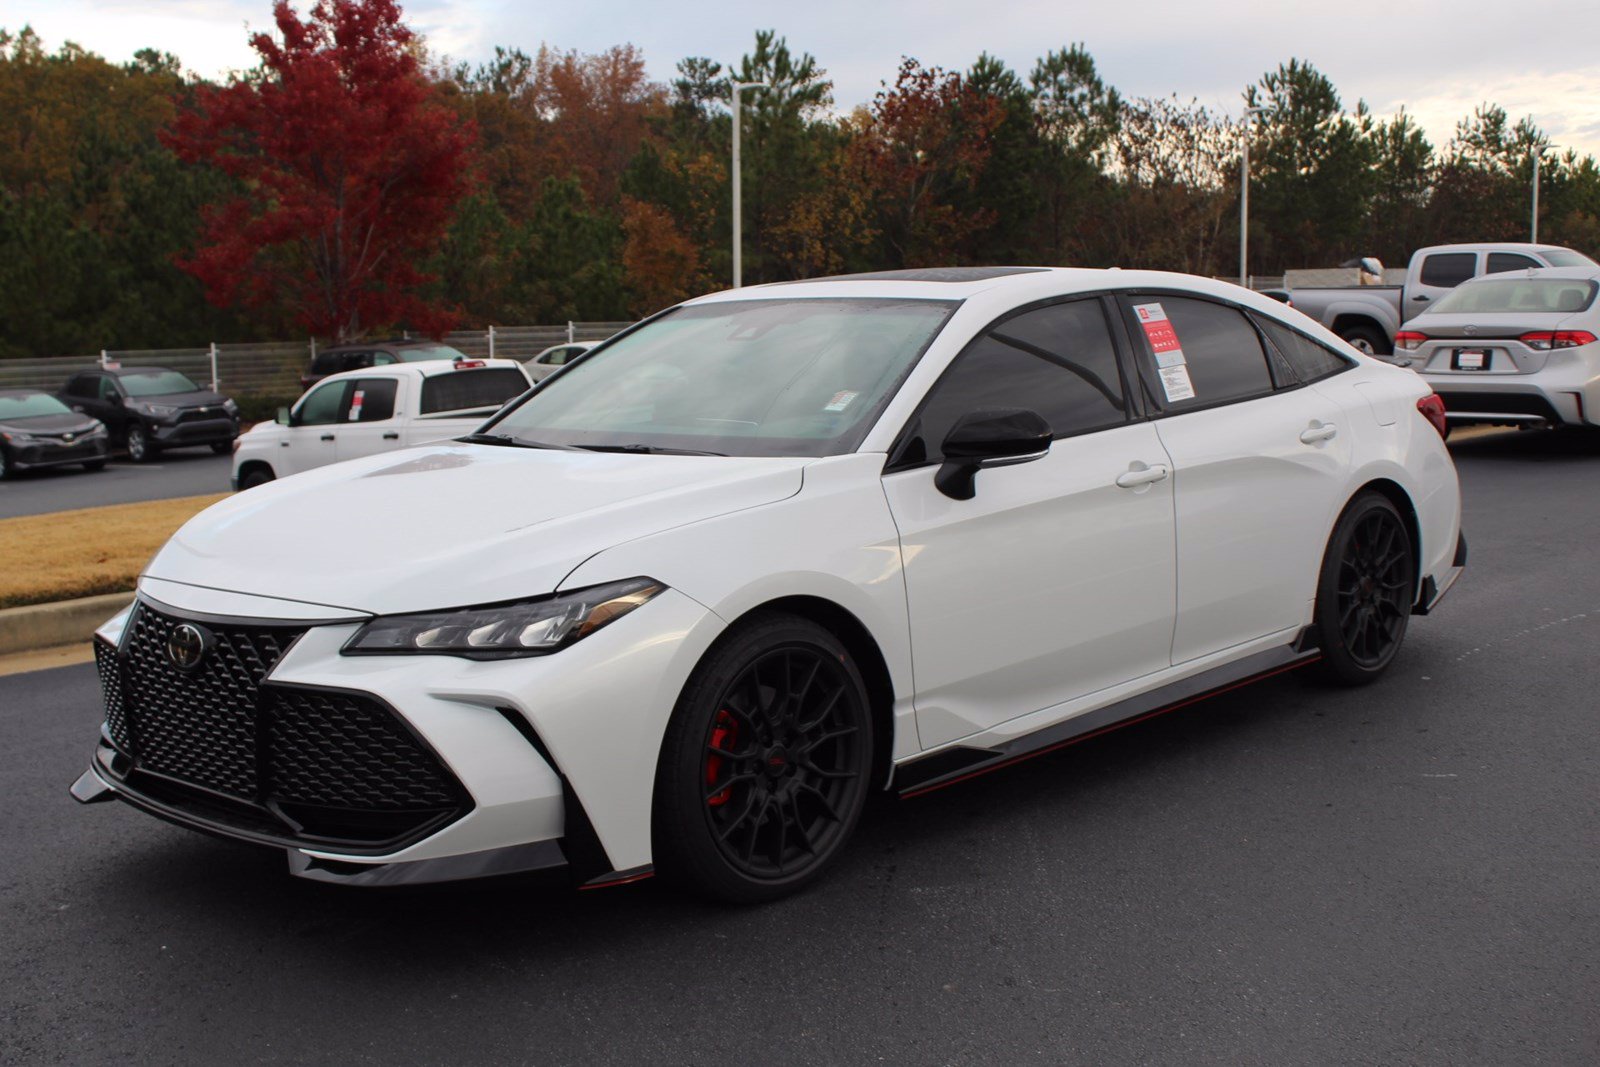 New 2020 Toyota Avalon TRD 4dr Car in Macon U042665 Butler Auto Group